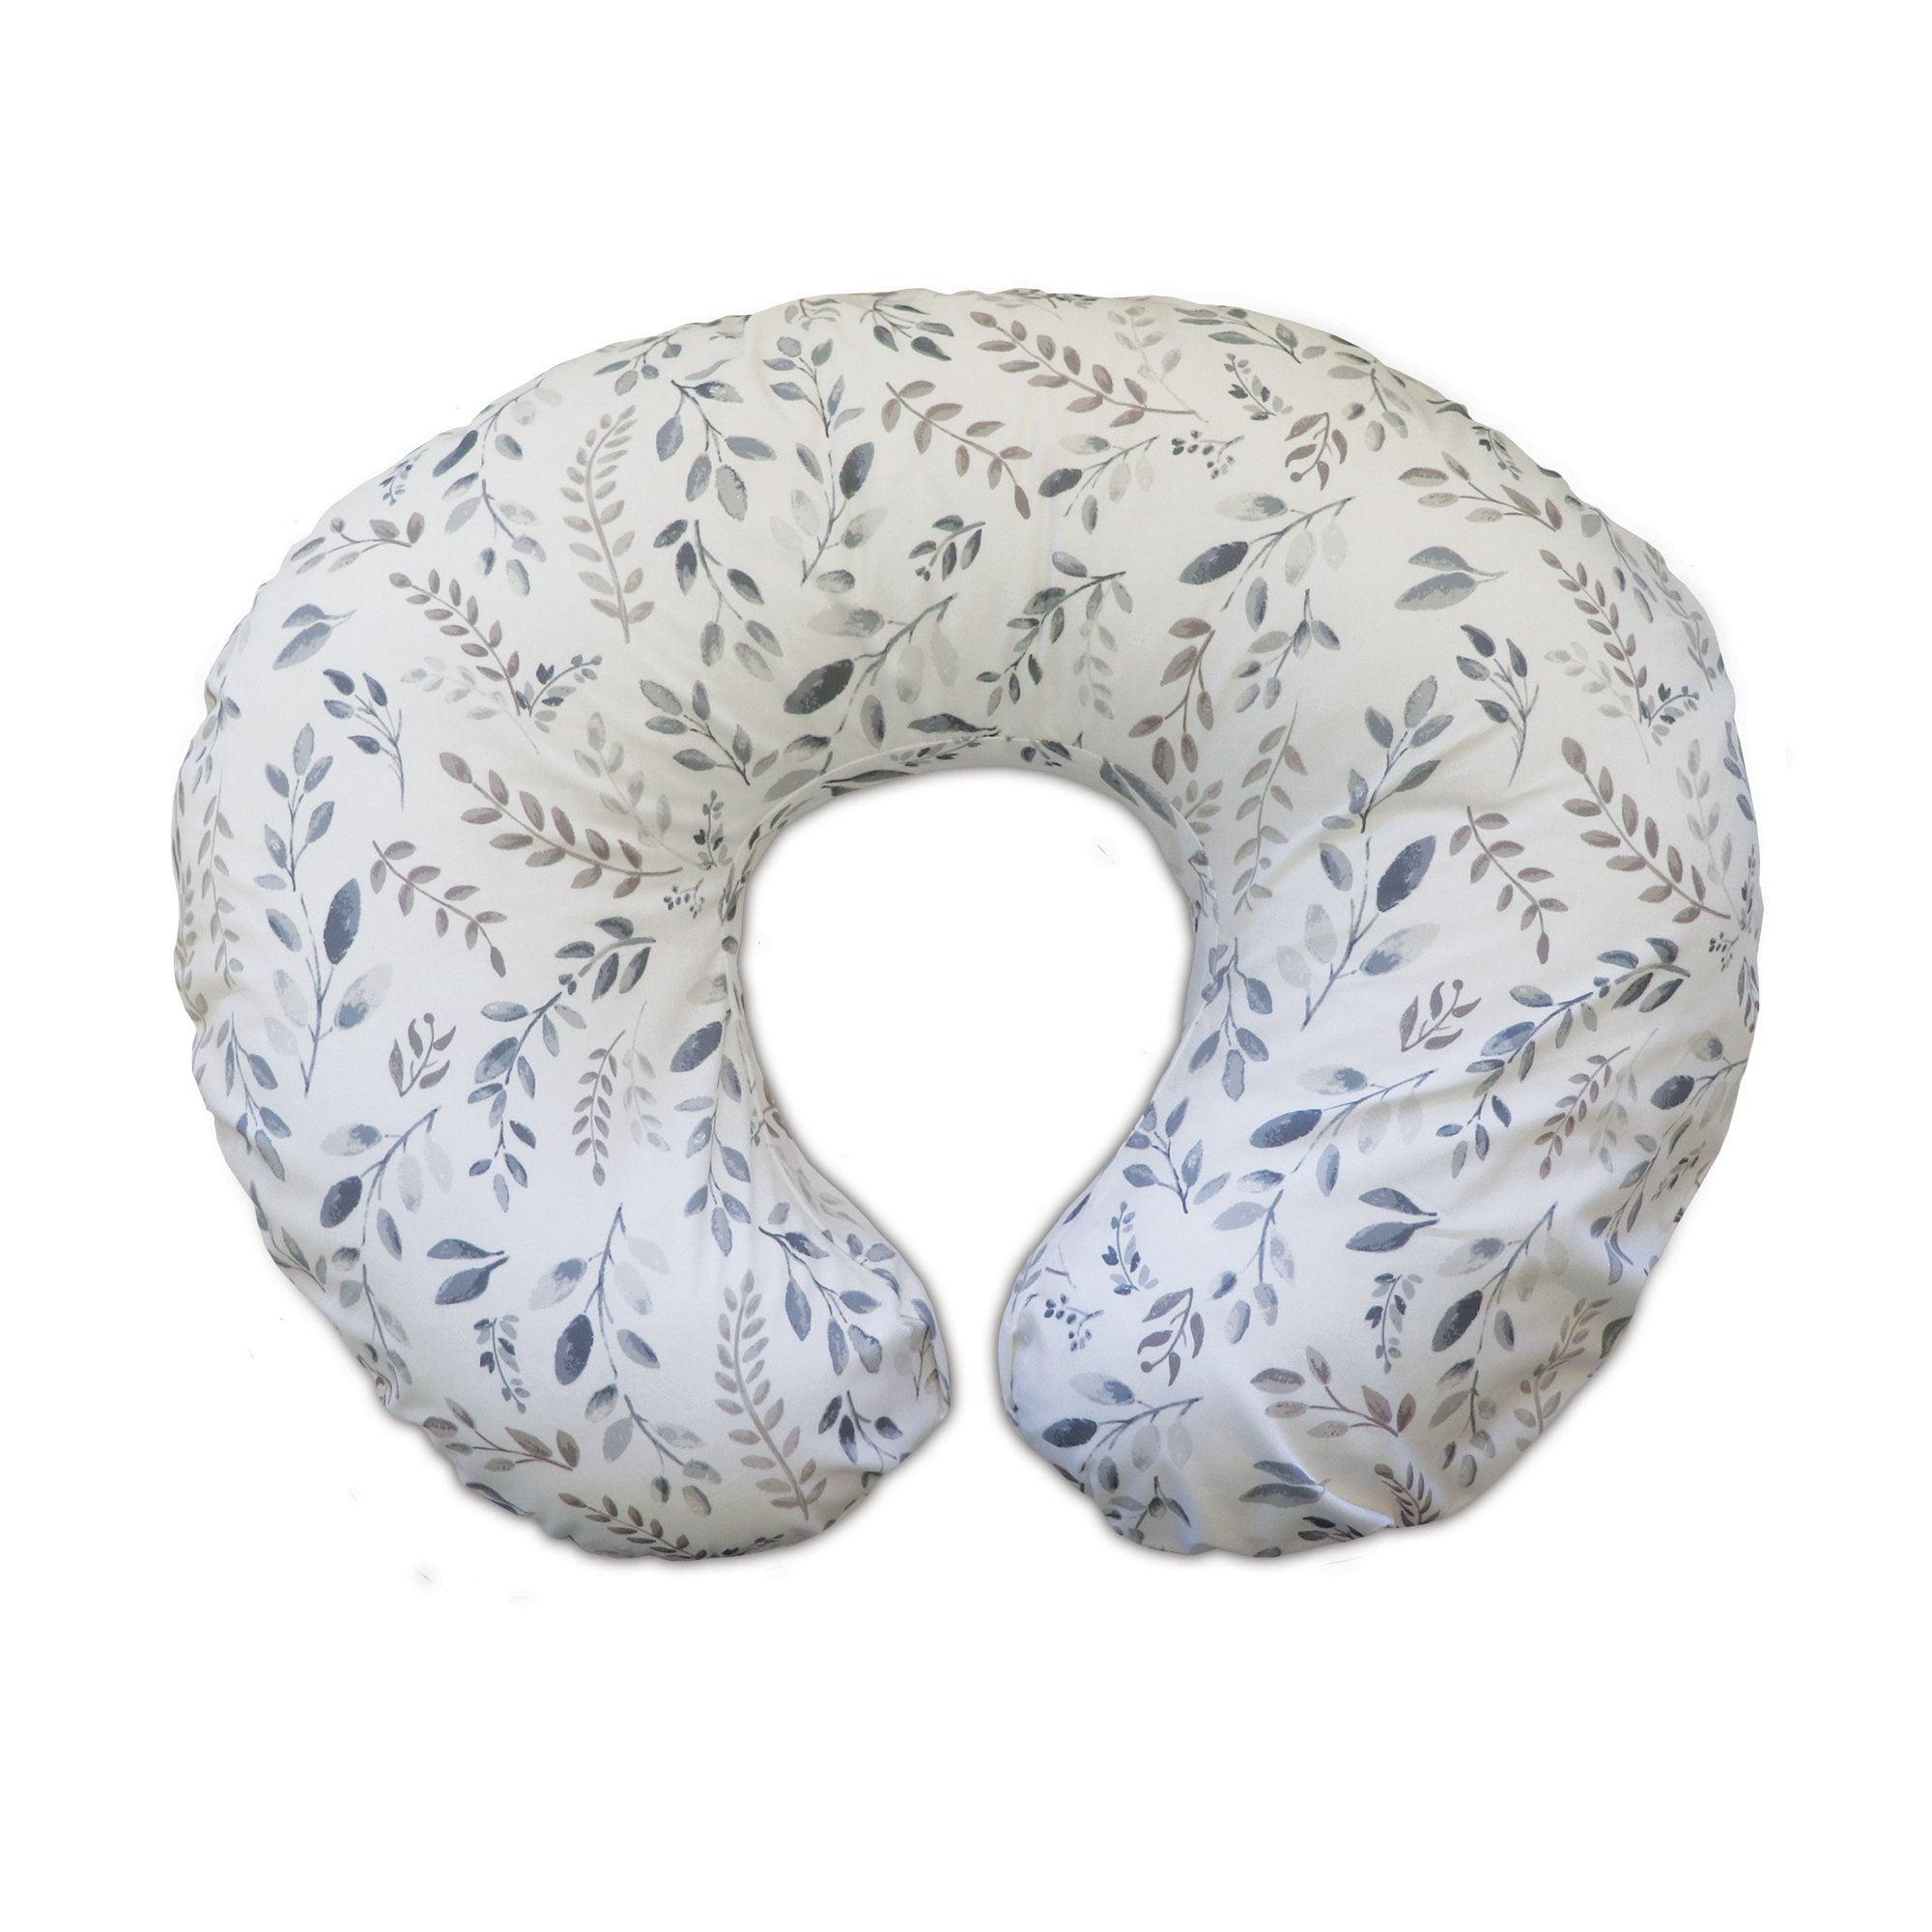 Boppy Nursing Pillow and Positioner - Gray Taupe Leaves - Walmart.com